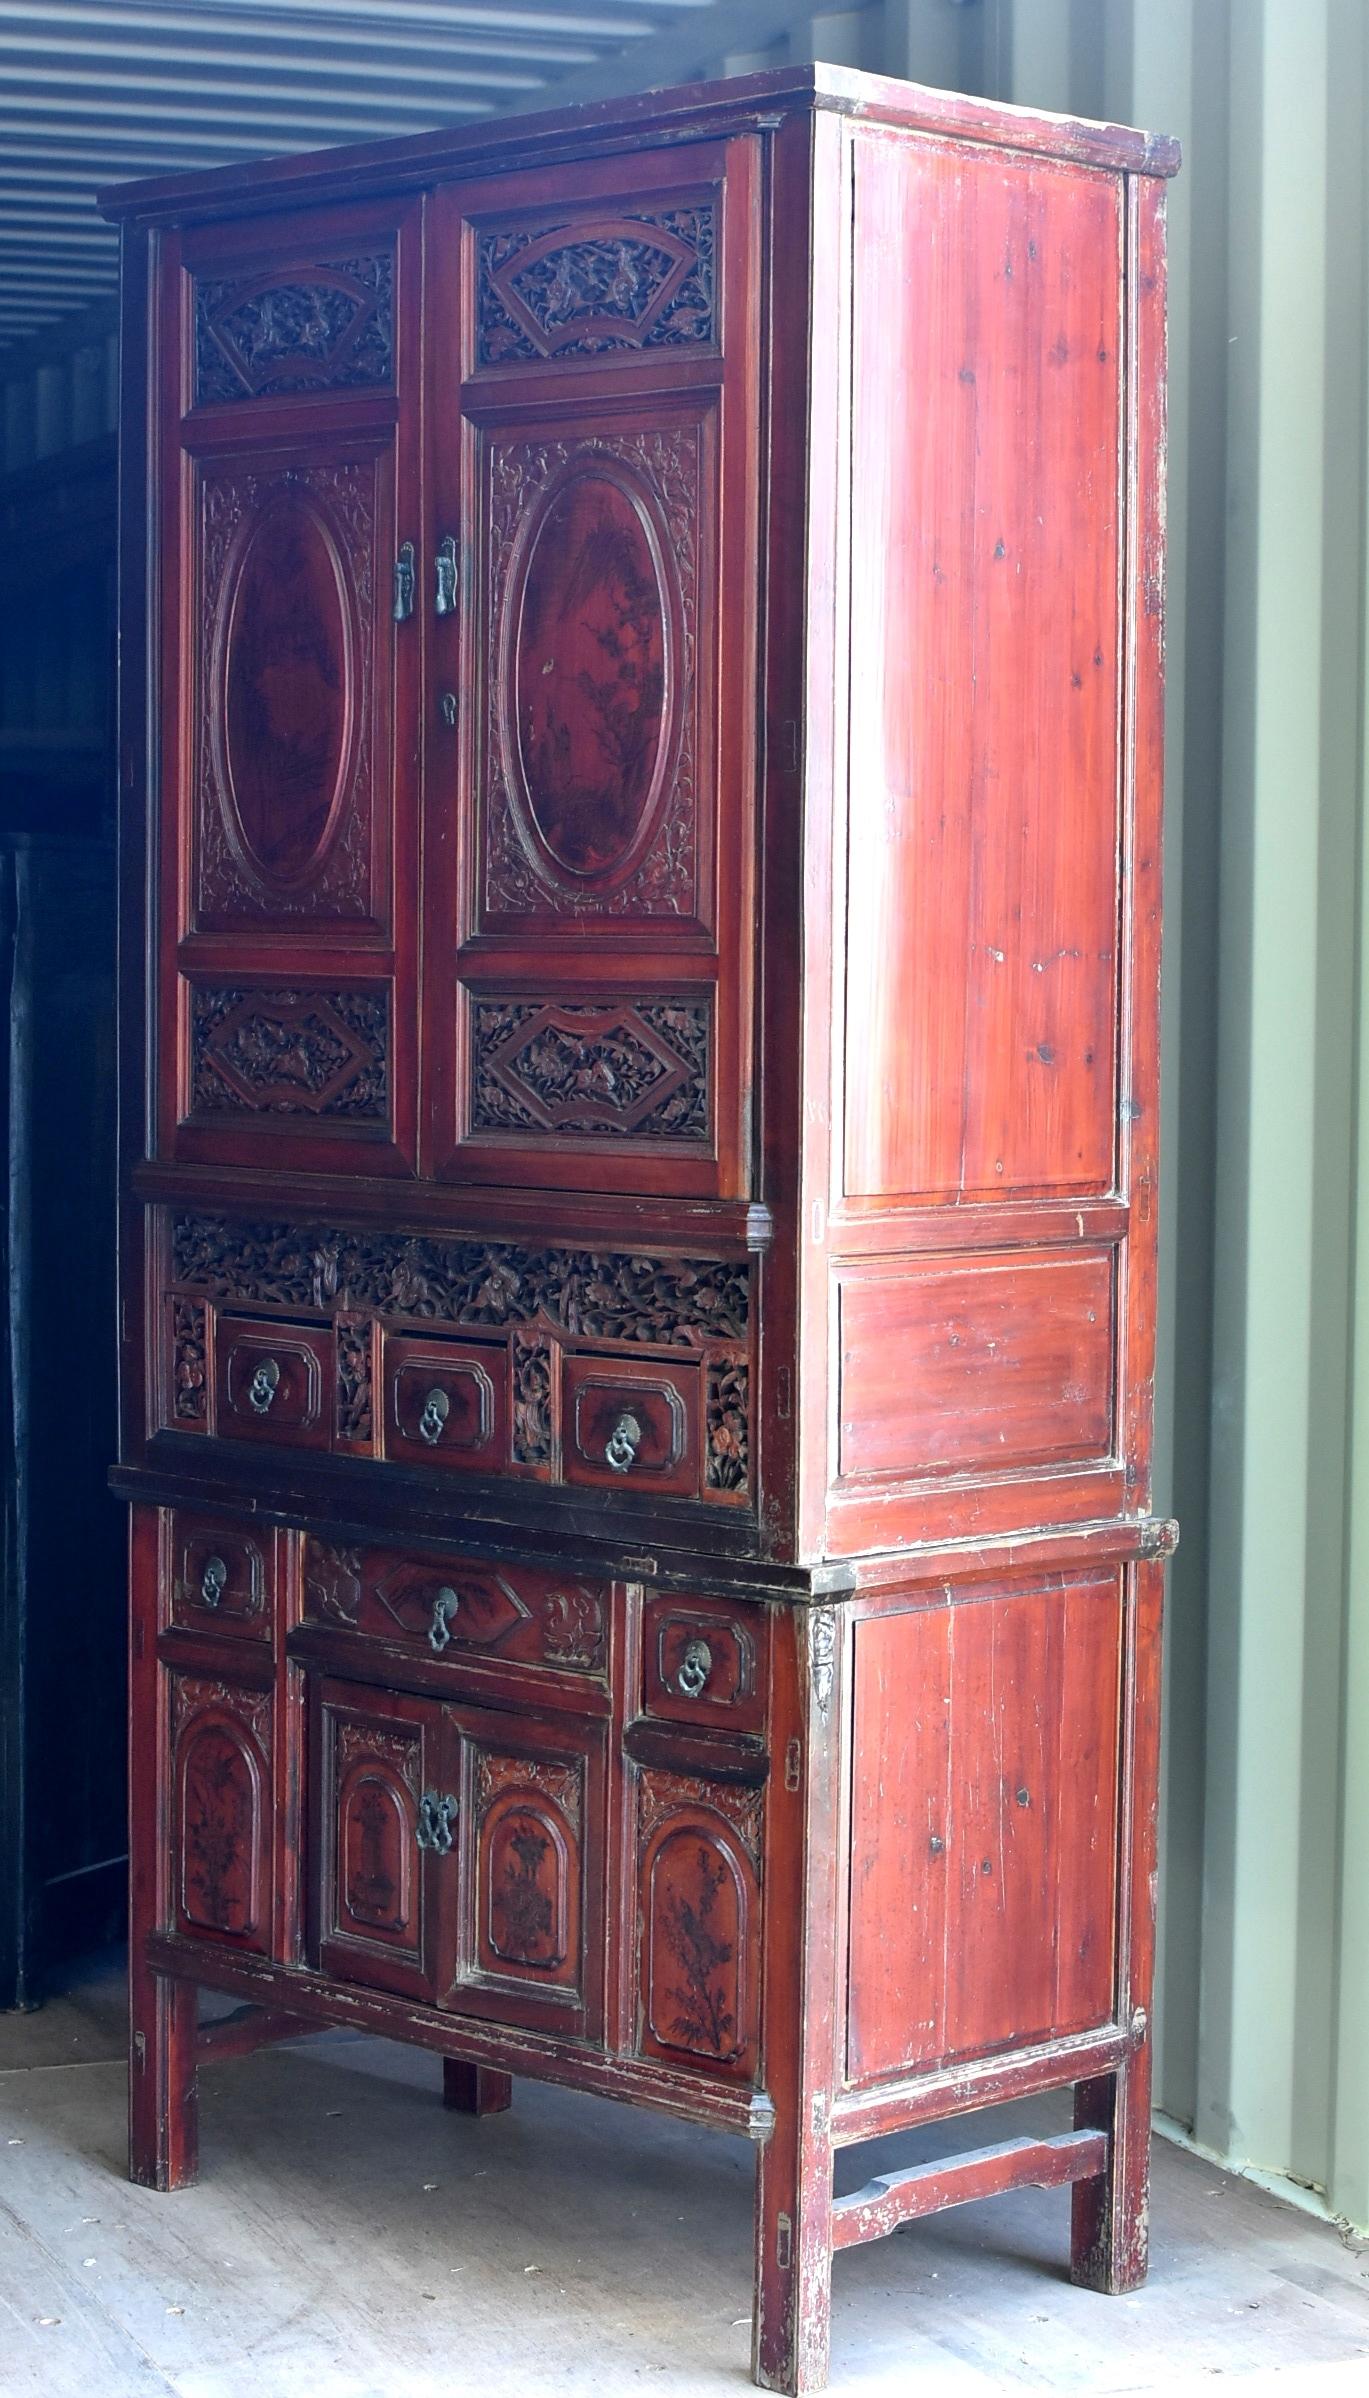 This rare, magnificent, fully carved cabinet was a scholar's treasure chest. Hand-painted oval door panels depict the leisure lives of fisherman and a strolling scholar. Fully carved facades showcase scenes from an opera of a victorious historic